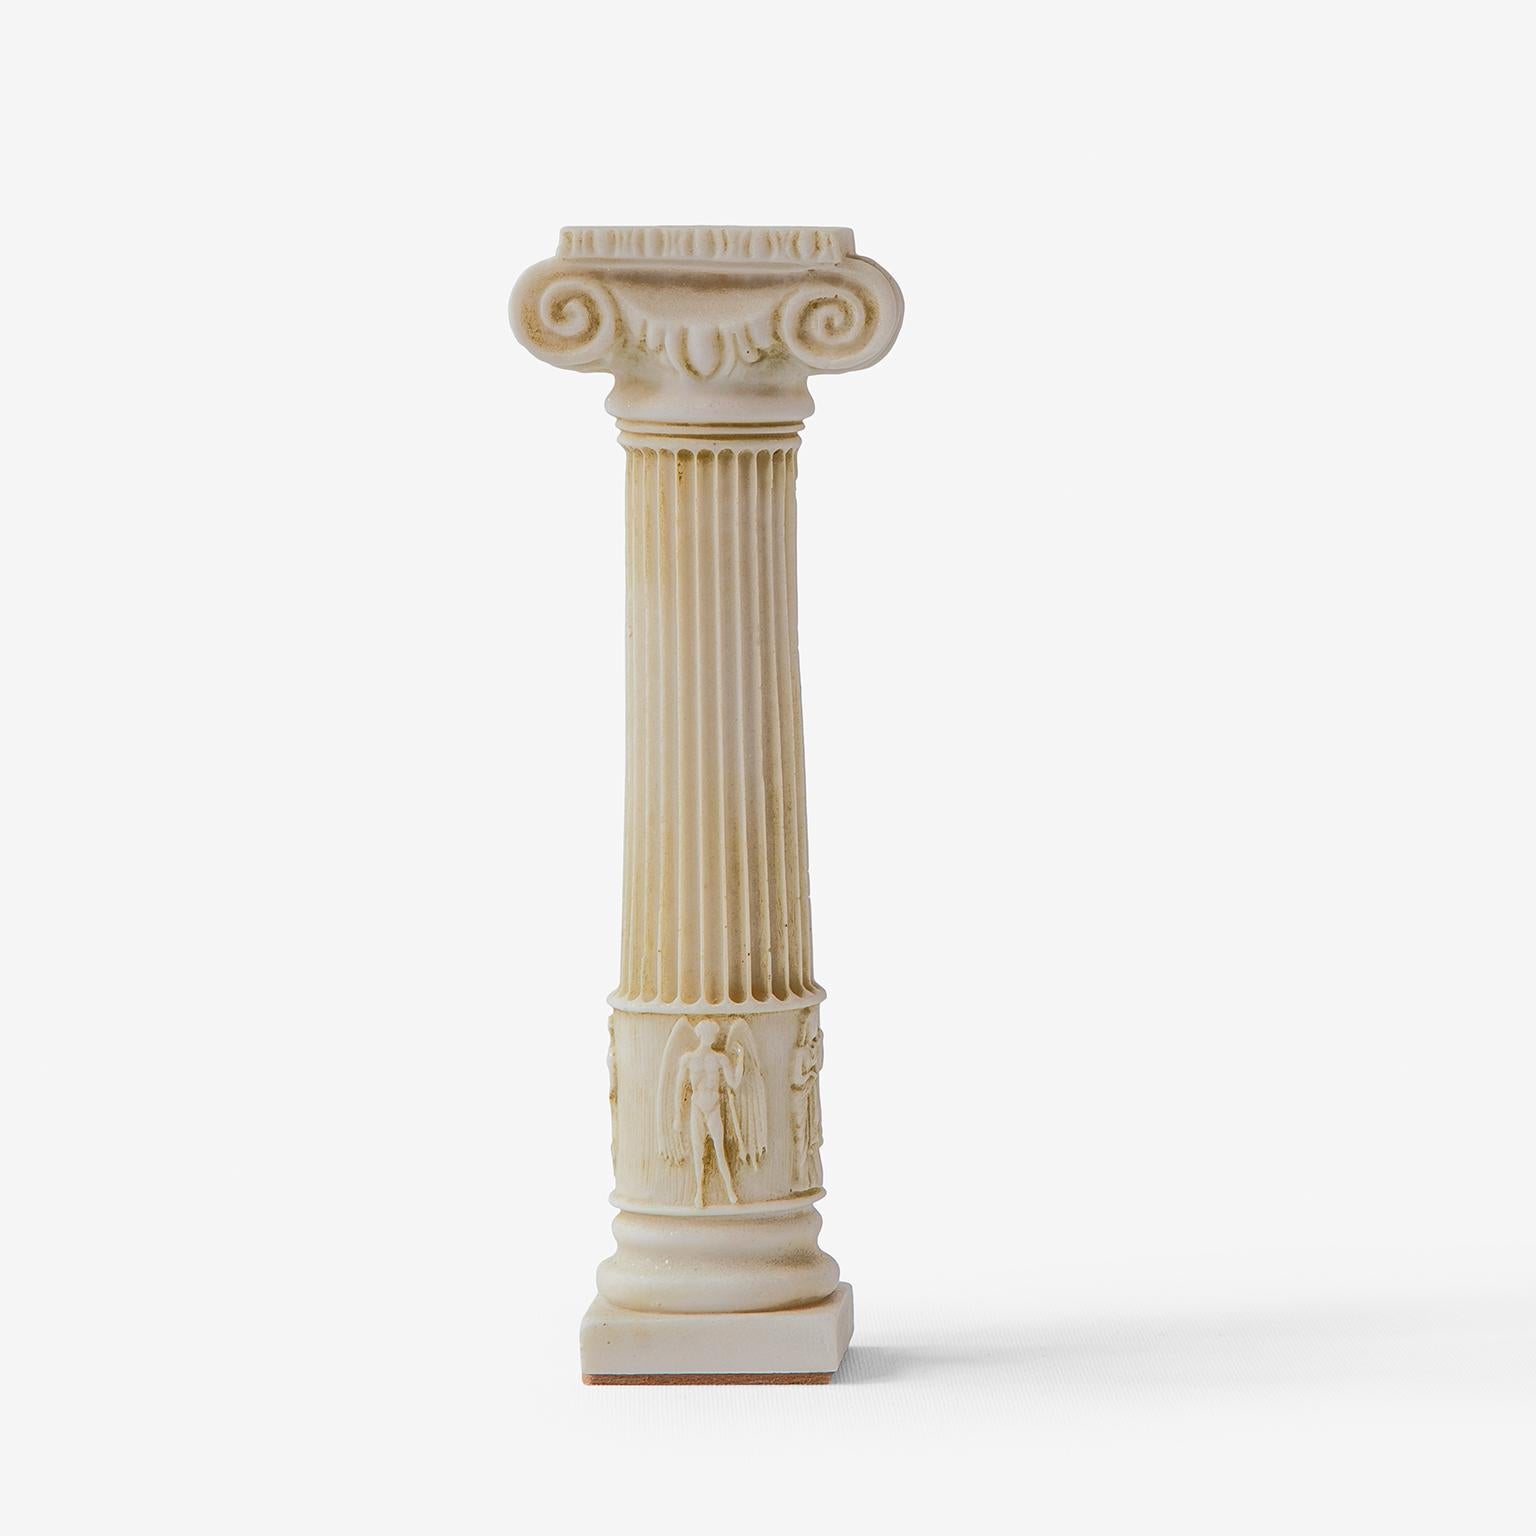 Weight: 700 gr

This candlestick is a decorative item that resembles the thin, long and elegant form of Ionic regular columns found on the western and southern coasts of Anatolia. It is made from compressed marble powder and is produced using the